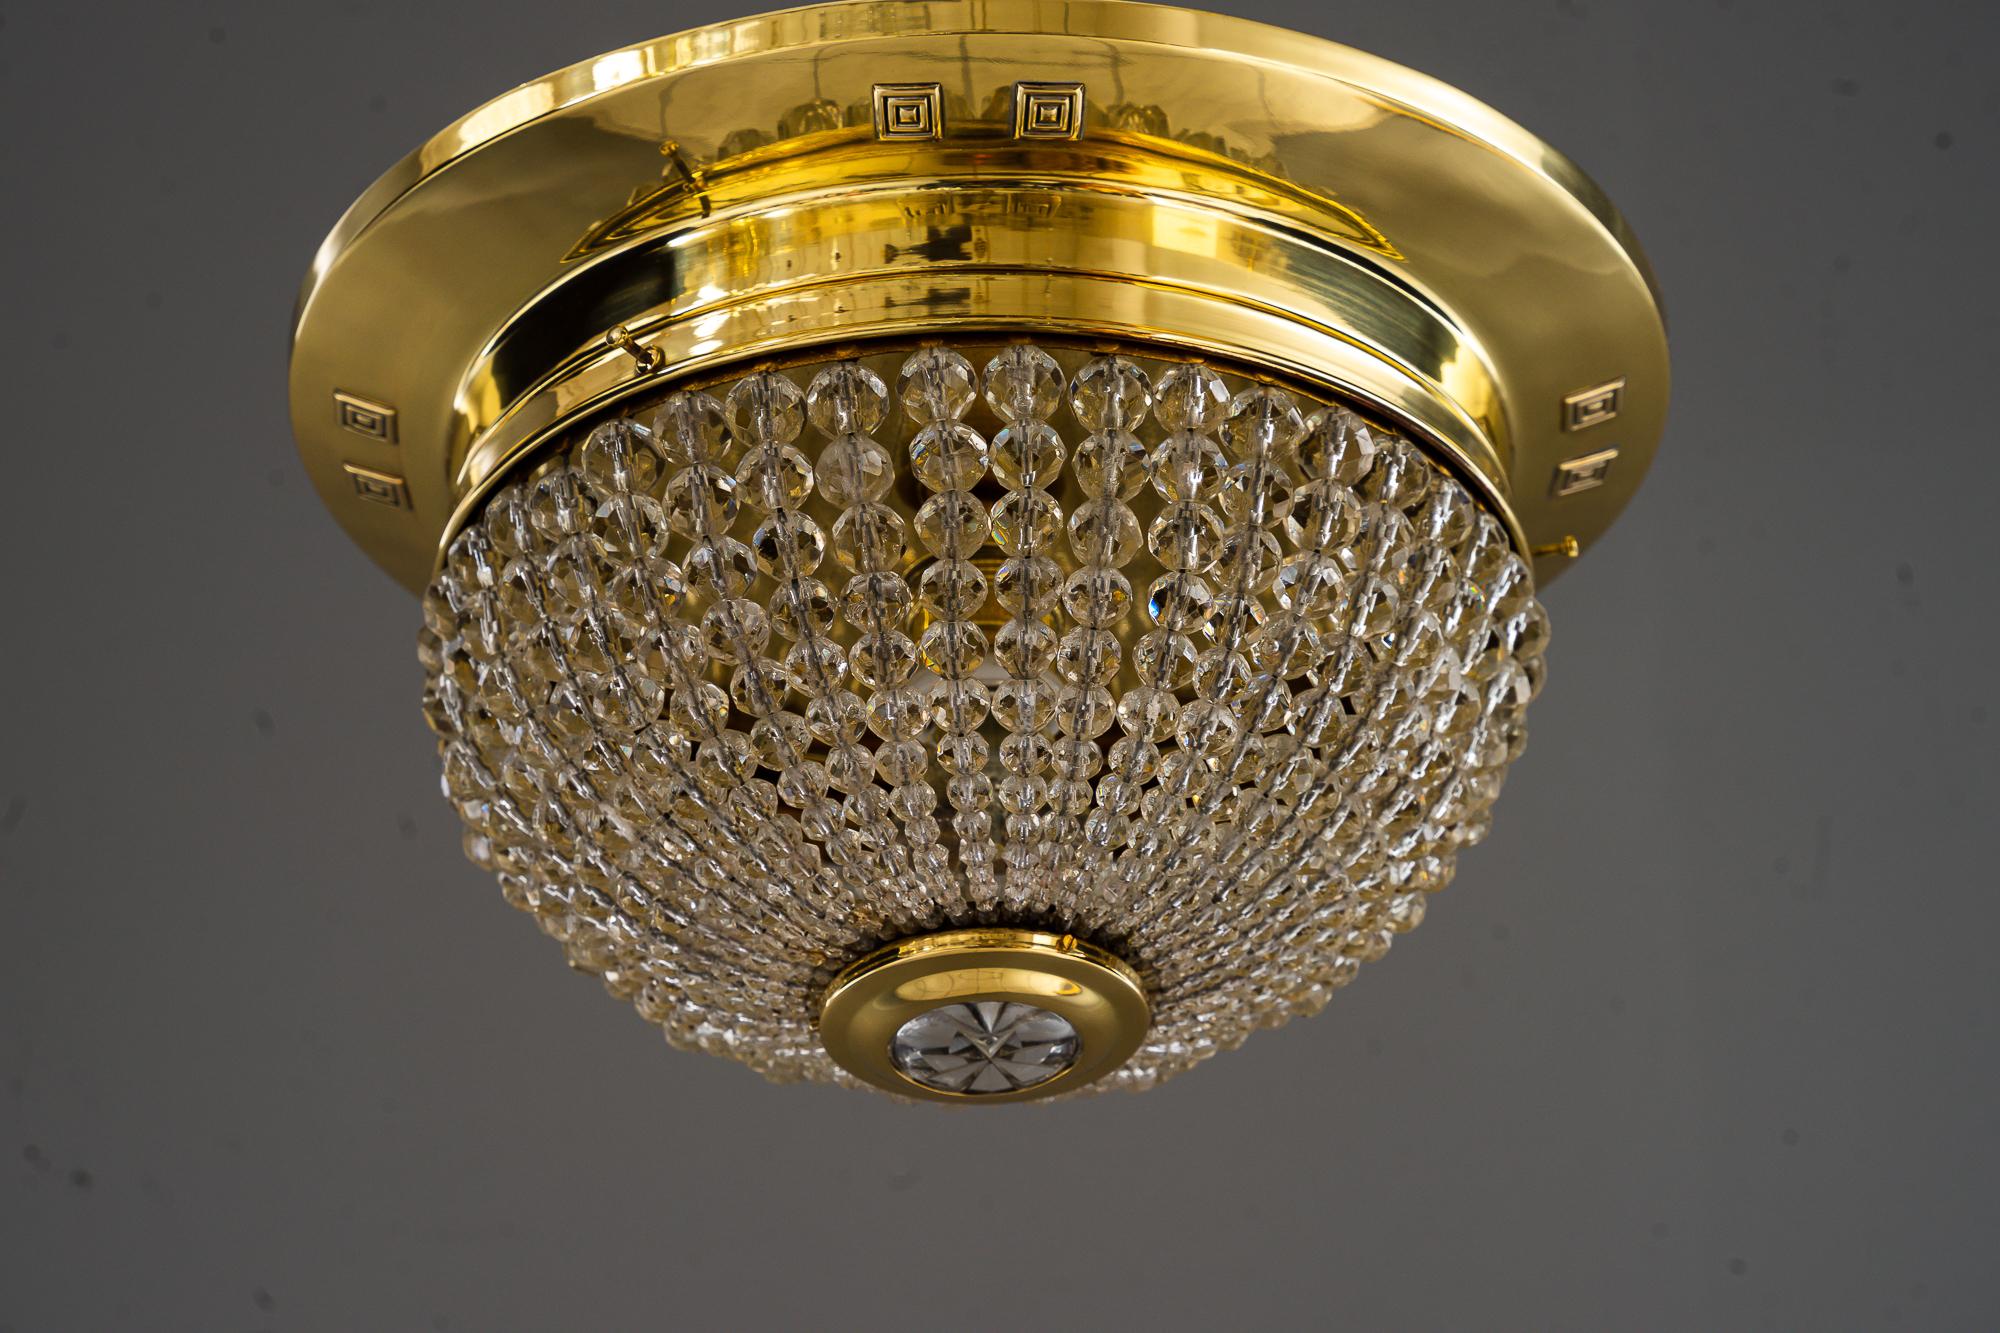 Art Deco ceiling lamp vienna around 1920s
Polished and stove enameled
Original cut glass balls
The glass balls part is removable for changing the bulb
1 bulb inside.